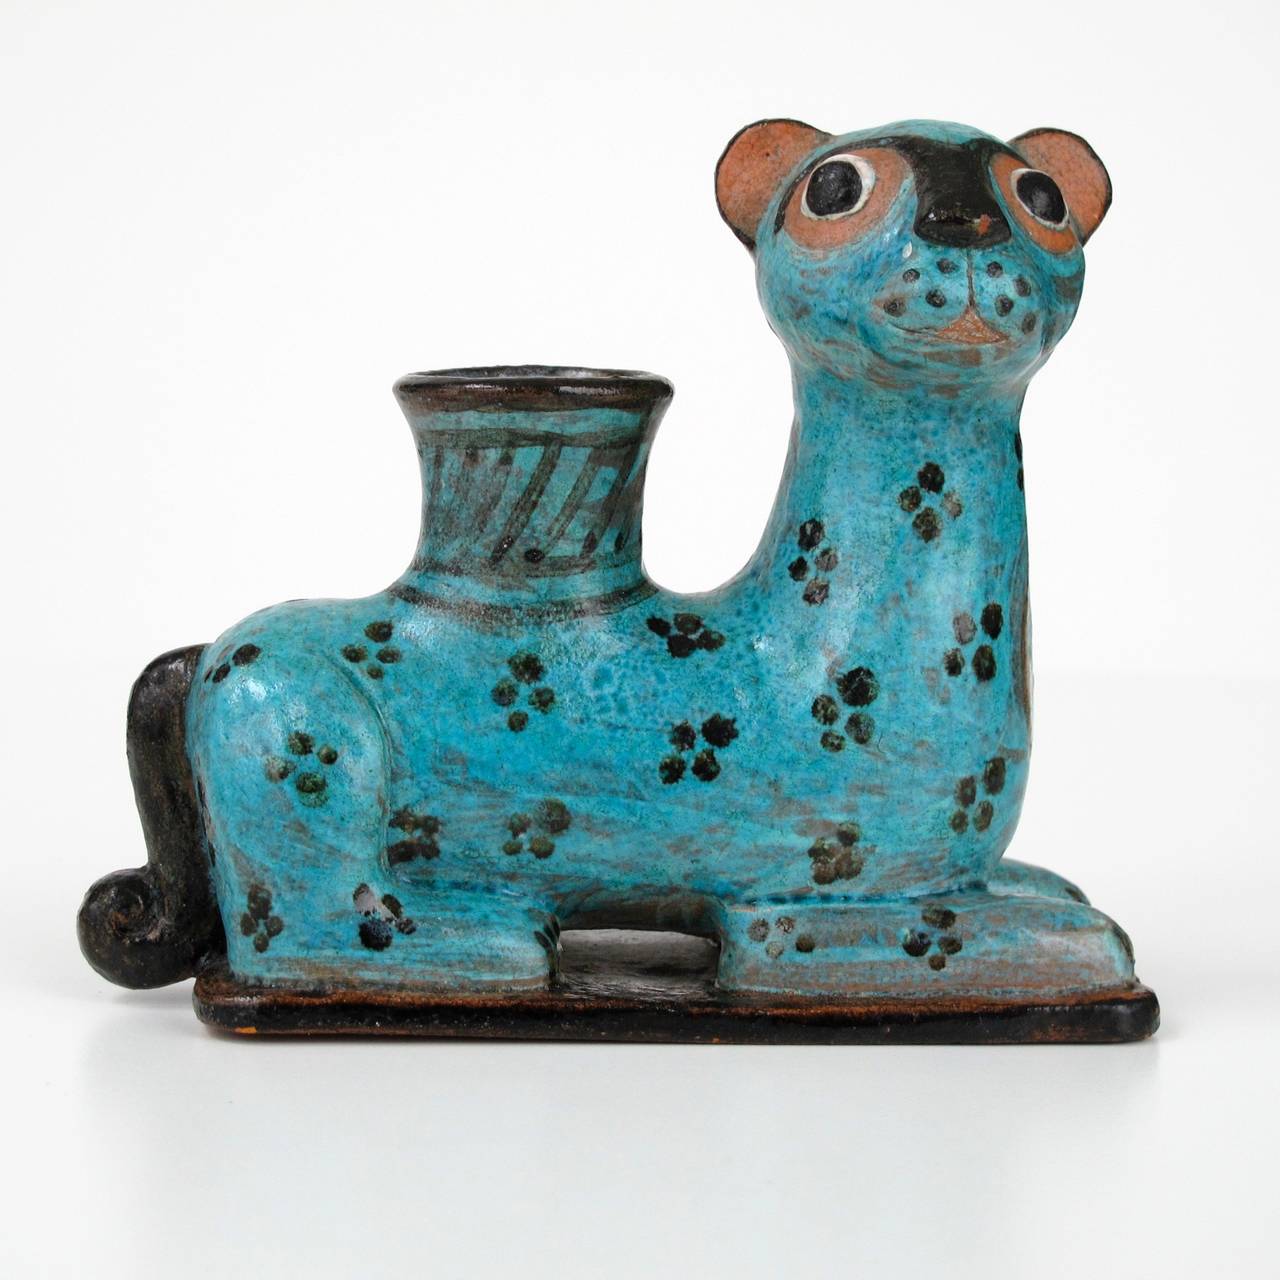 Dutch Set of Feline-Shaped Polychrome Earthenware Candleholders by Lily ter Kuile